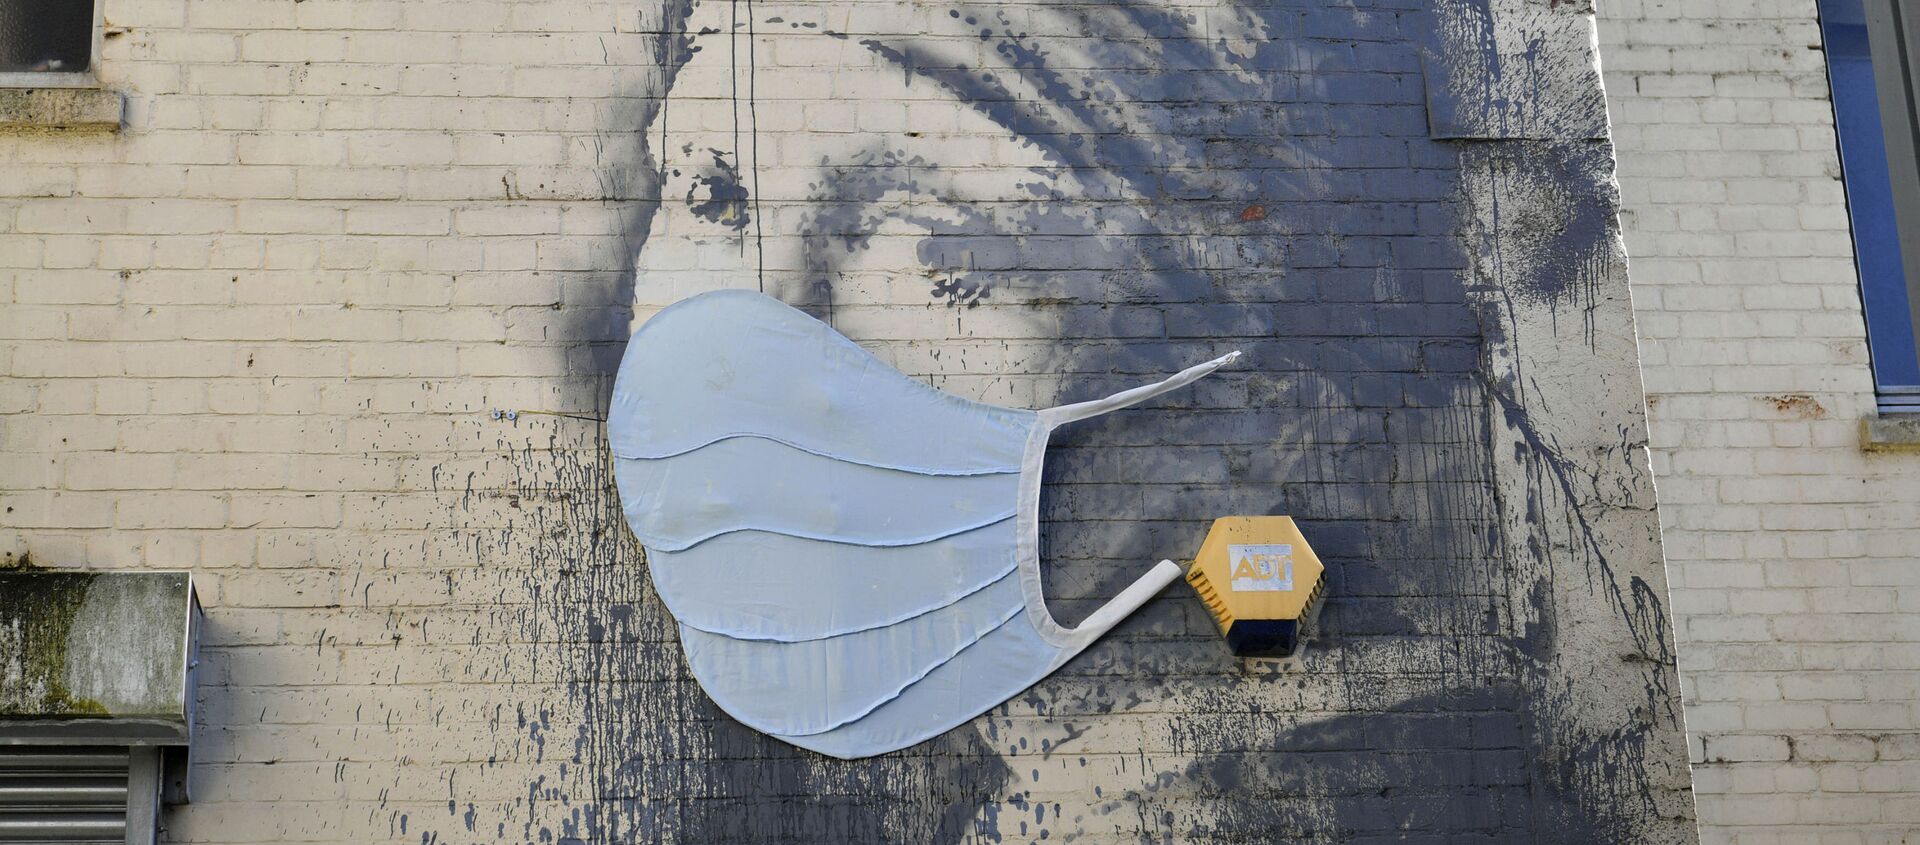 Banksy's Girl with a Pierced Eardrum mural has been given a face mask in a nod to the coronavirus pandemic as the UK continues in lockdown to help curb the spread of the coronavirus, in Bristol, England, Wednesday April 22, 2020 - Sputnik International, 1920, 23.01.2021